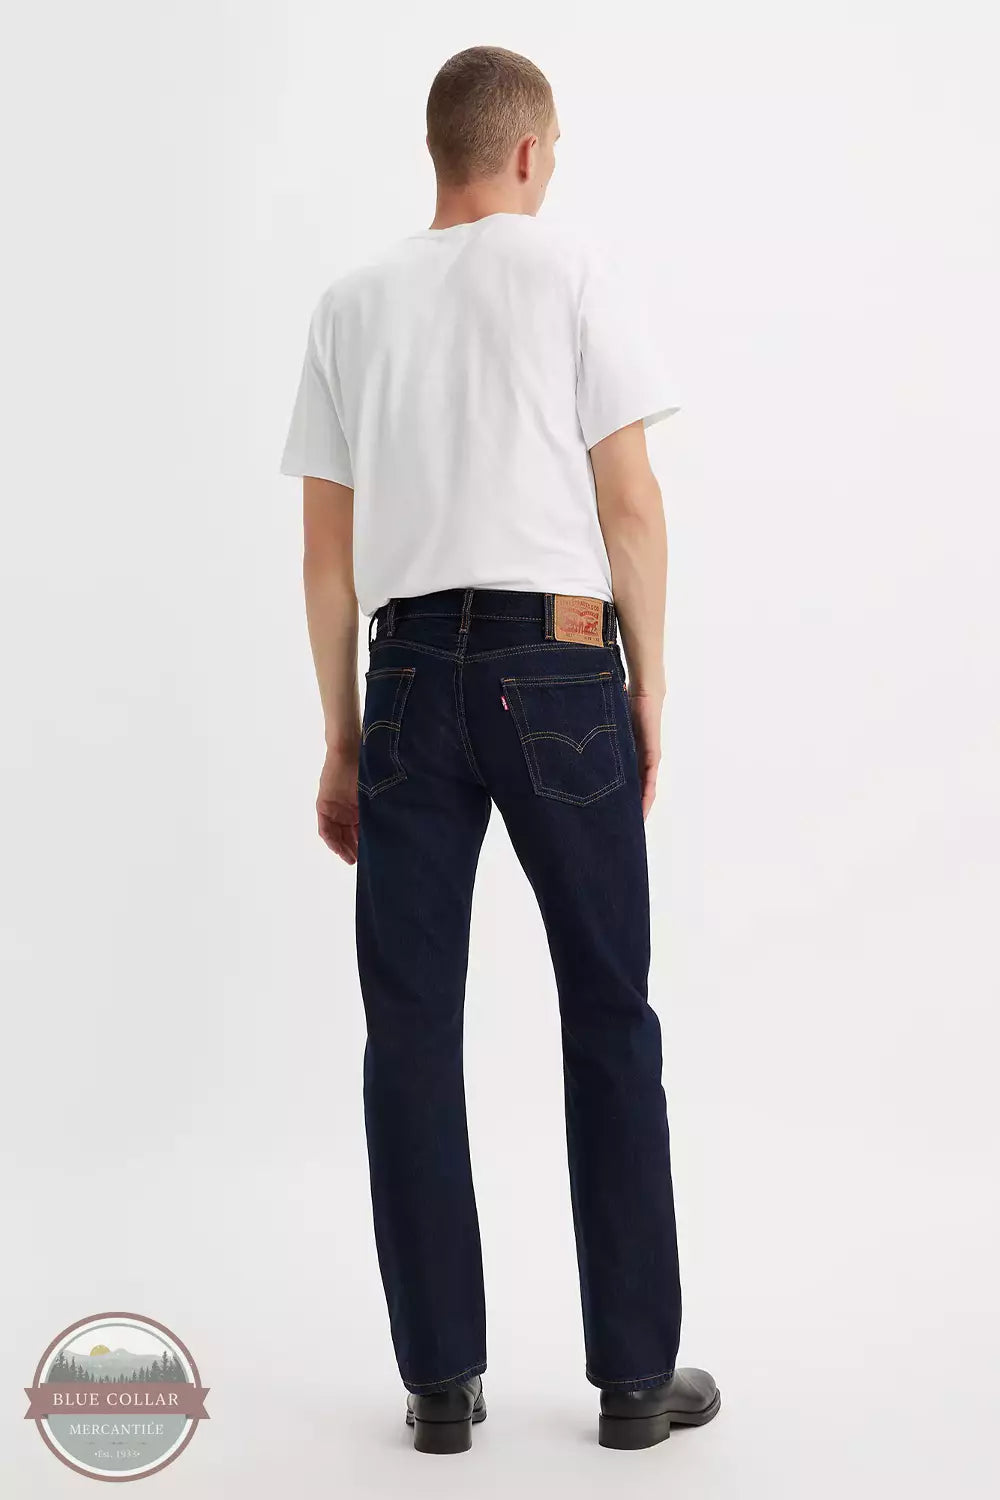 517™ Slim Fit Bootcut Jeans in Rinse Dark Wash by Levi's 517-0216